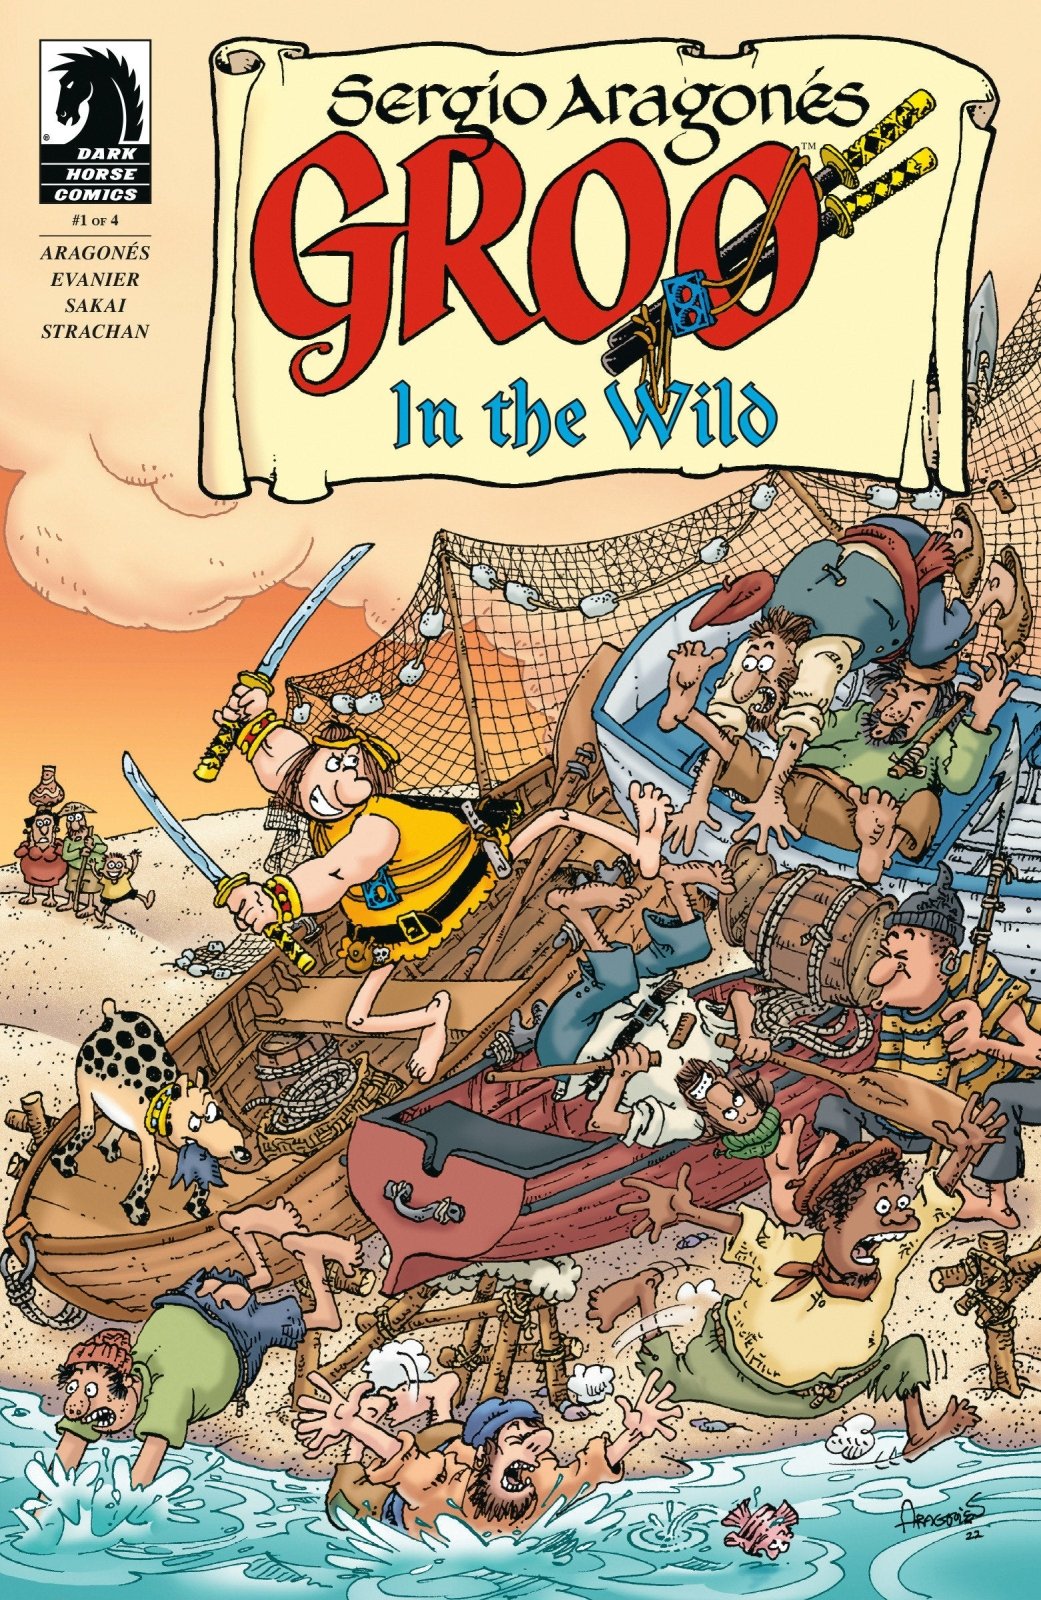 Groo: In The Wild #1 - The Fourth Place